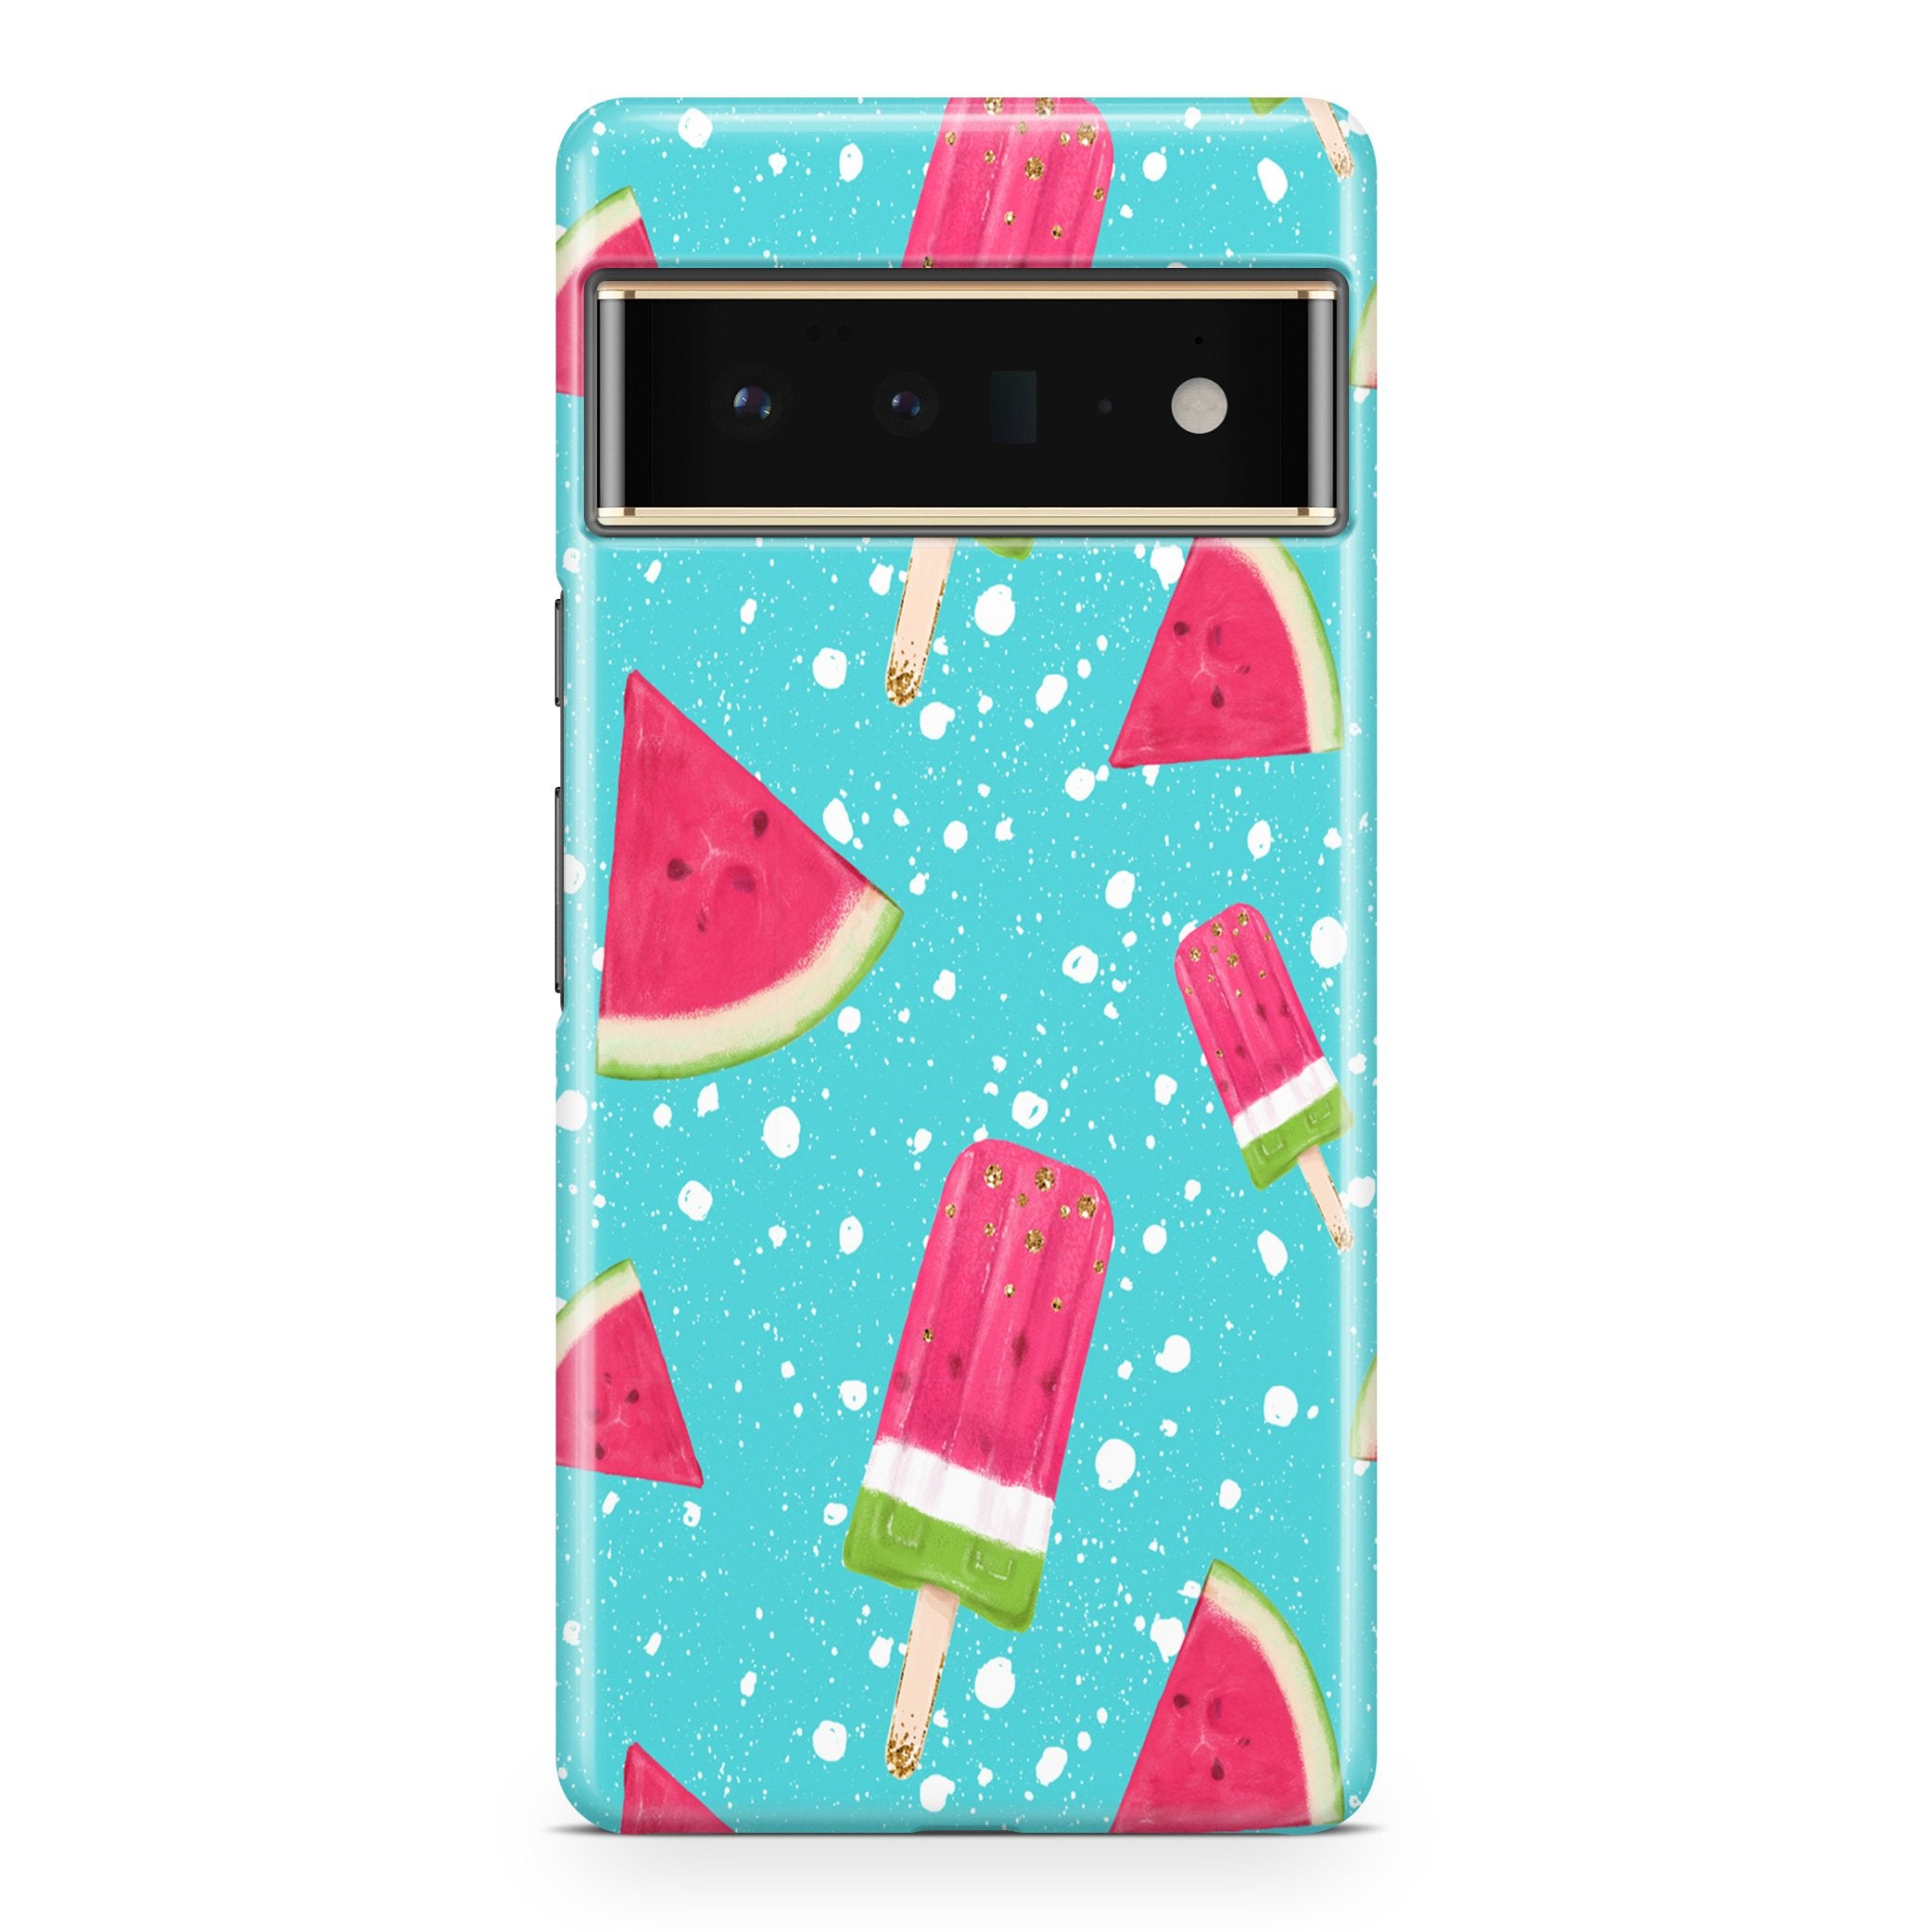 Watermelon Popsicle - Google phone case designs by CaseSwagger